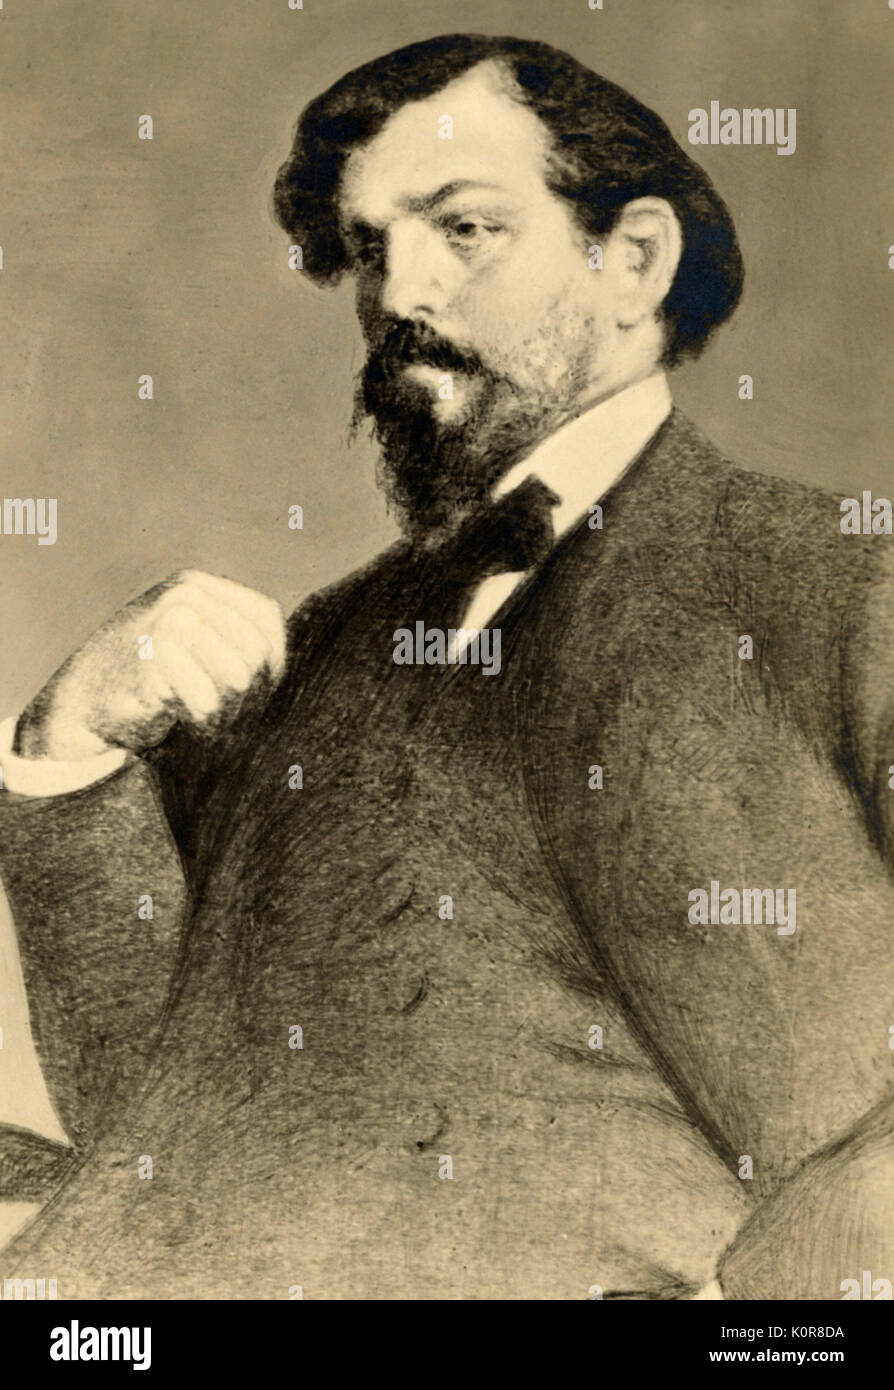 DEBUSSY, Claude - Portrait. French composer 22 August 1862 - 25 March 1918. Stock Photo